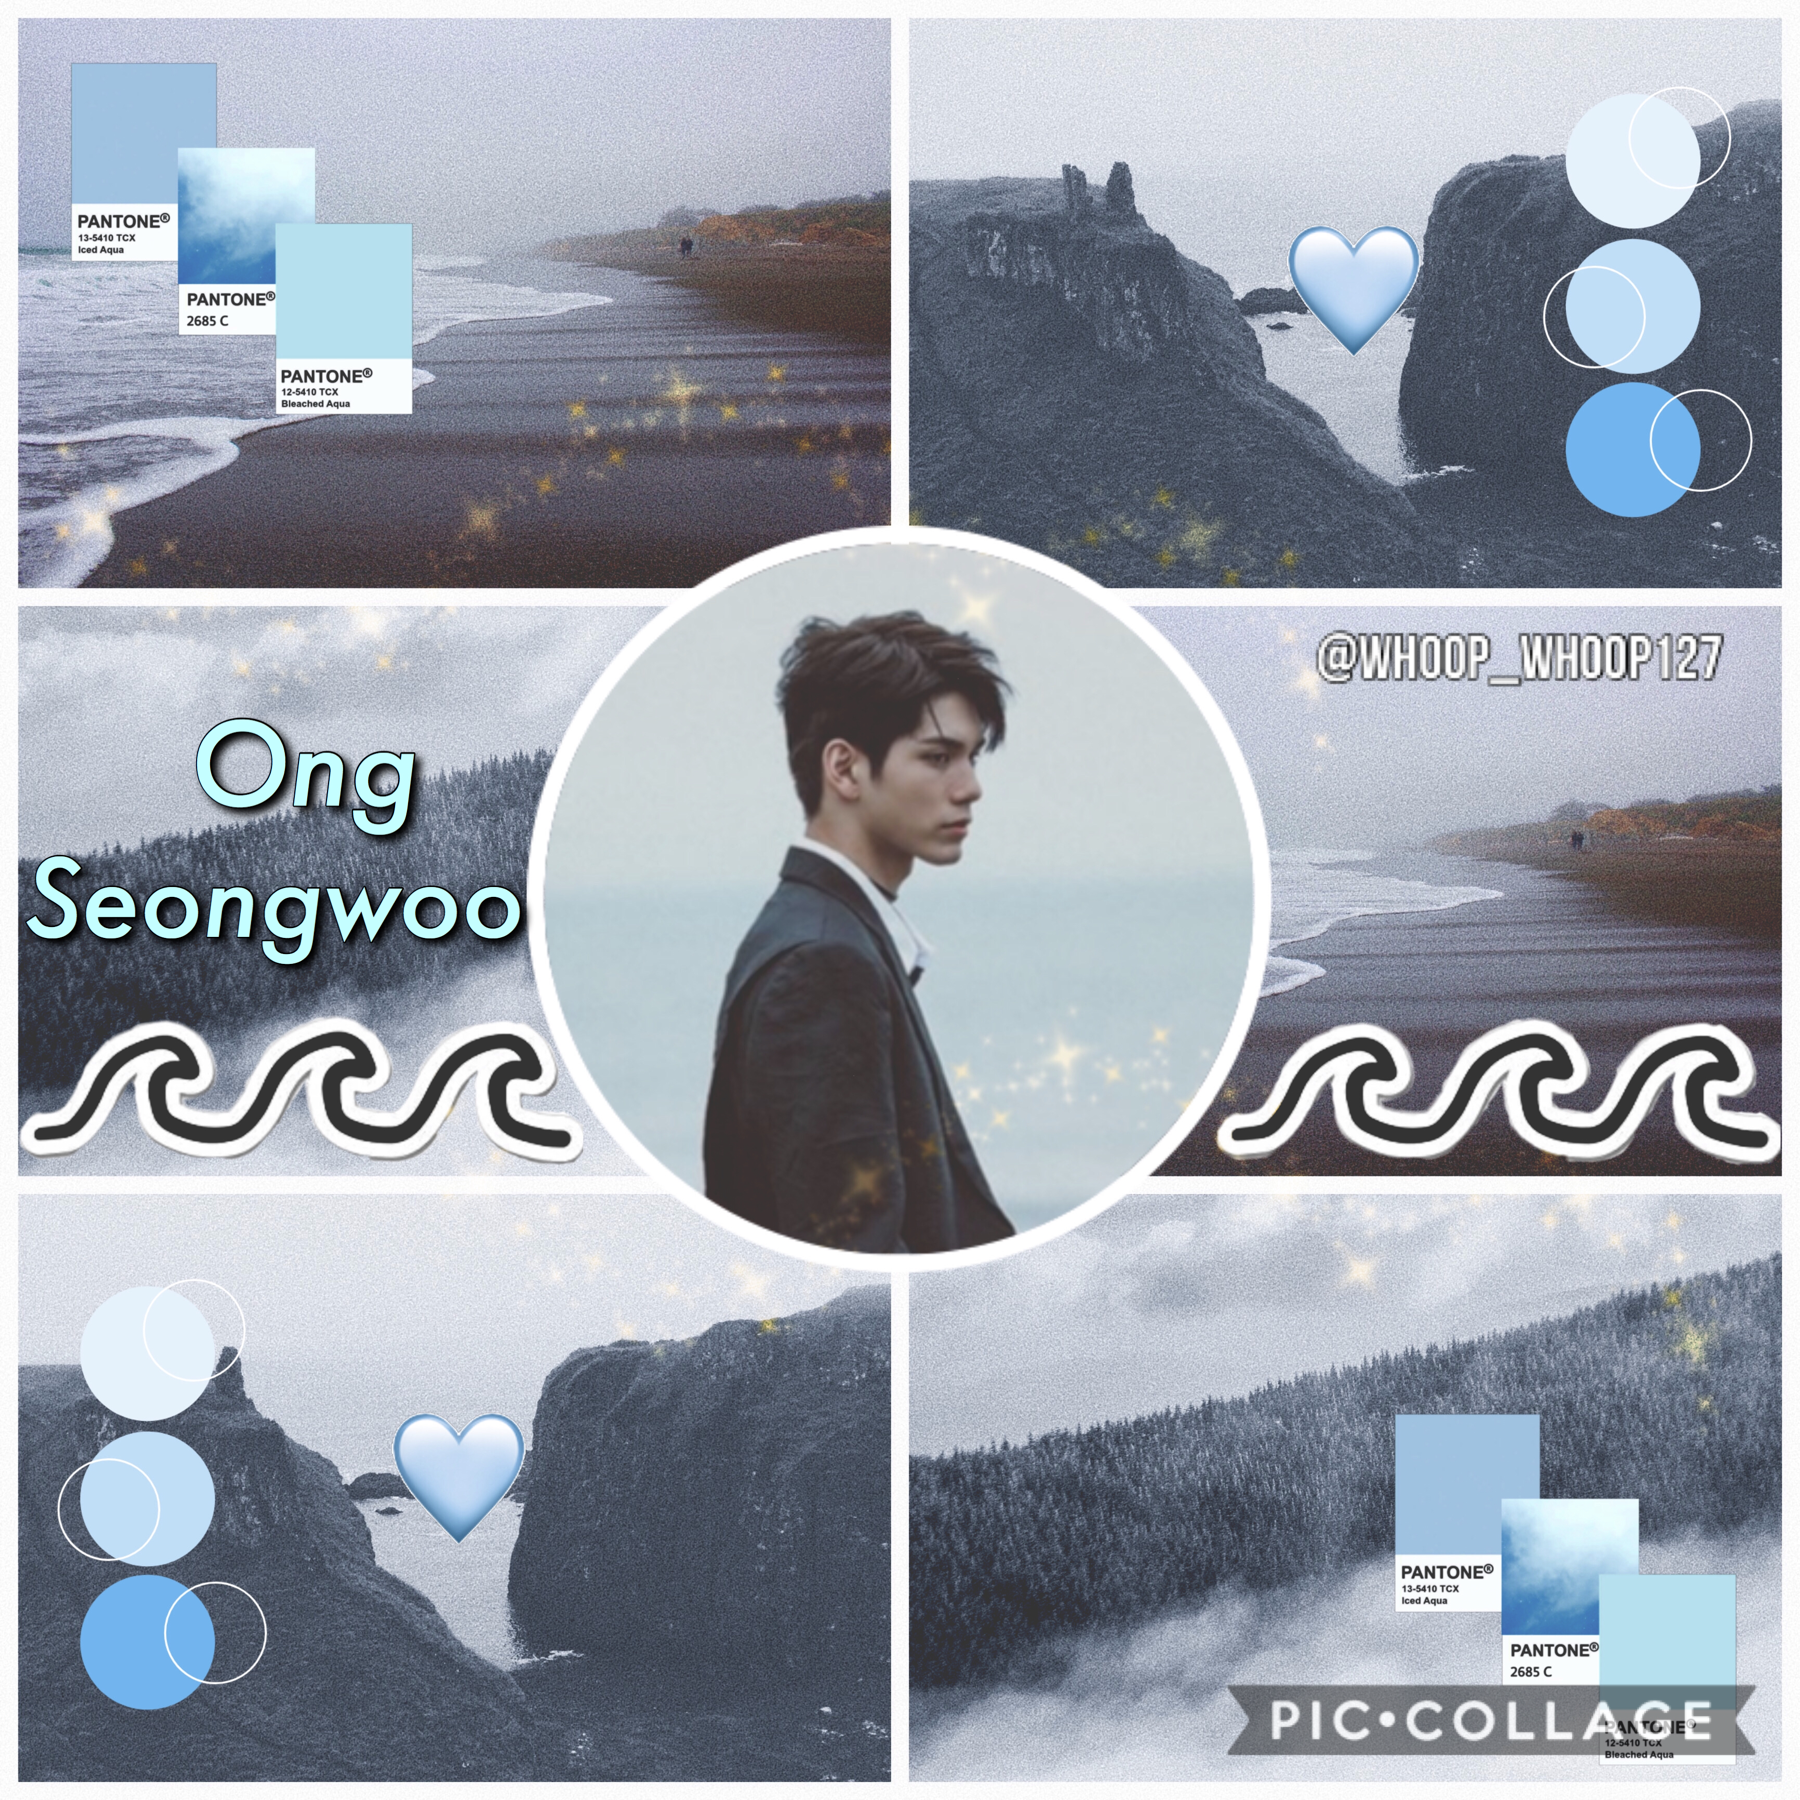 •🚒•
❄️Ong Seongwoo~ Wanna One, Solo, Actor❄️
Lowkey lost inspiration but I wanted to edit. Finals are over for me yay lol. Follow @Kpop_Birthdays if you don’t already bc I’m way active on that account at this point🤭🥺 I missed you all!💞💞